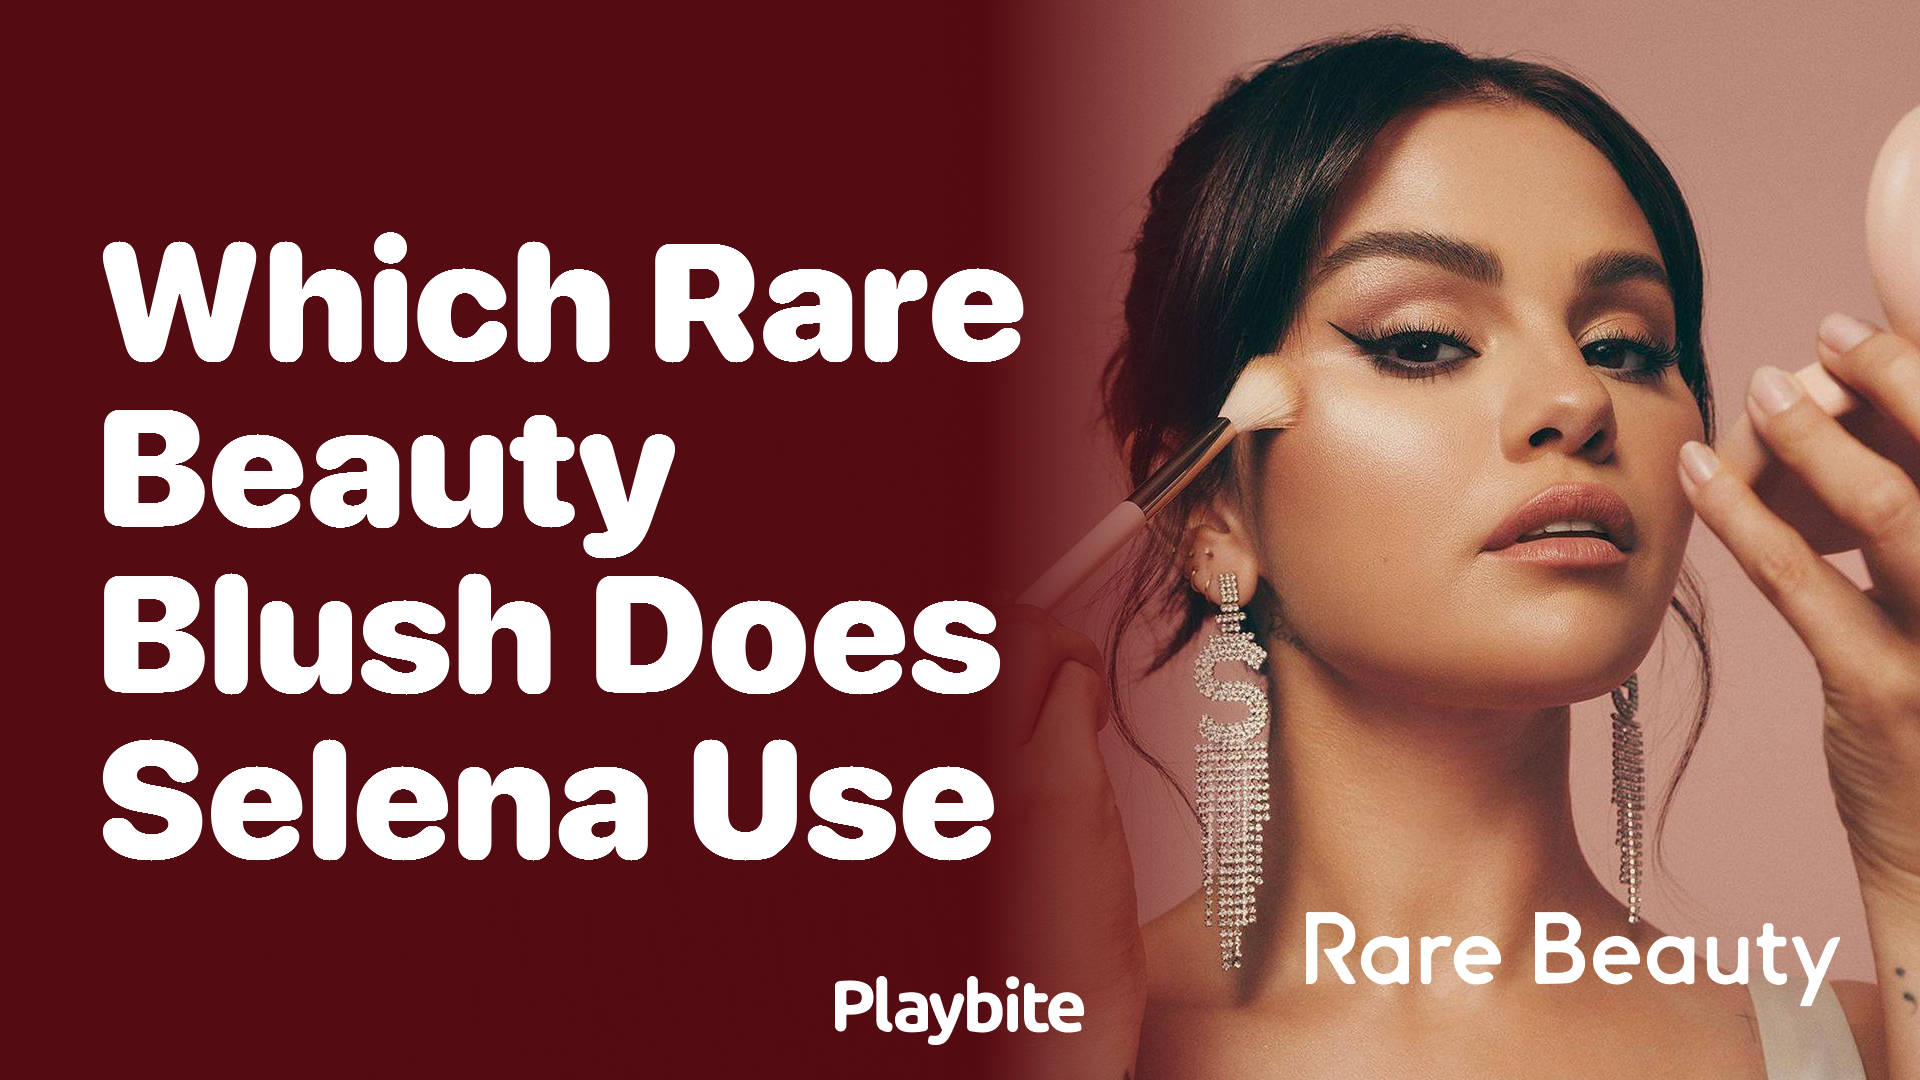 Which Rare Beauty Blush Does Selena Gomez Use?